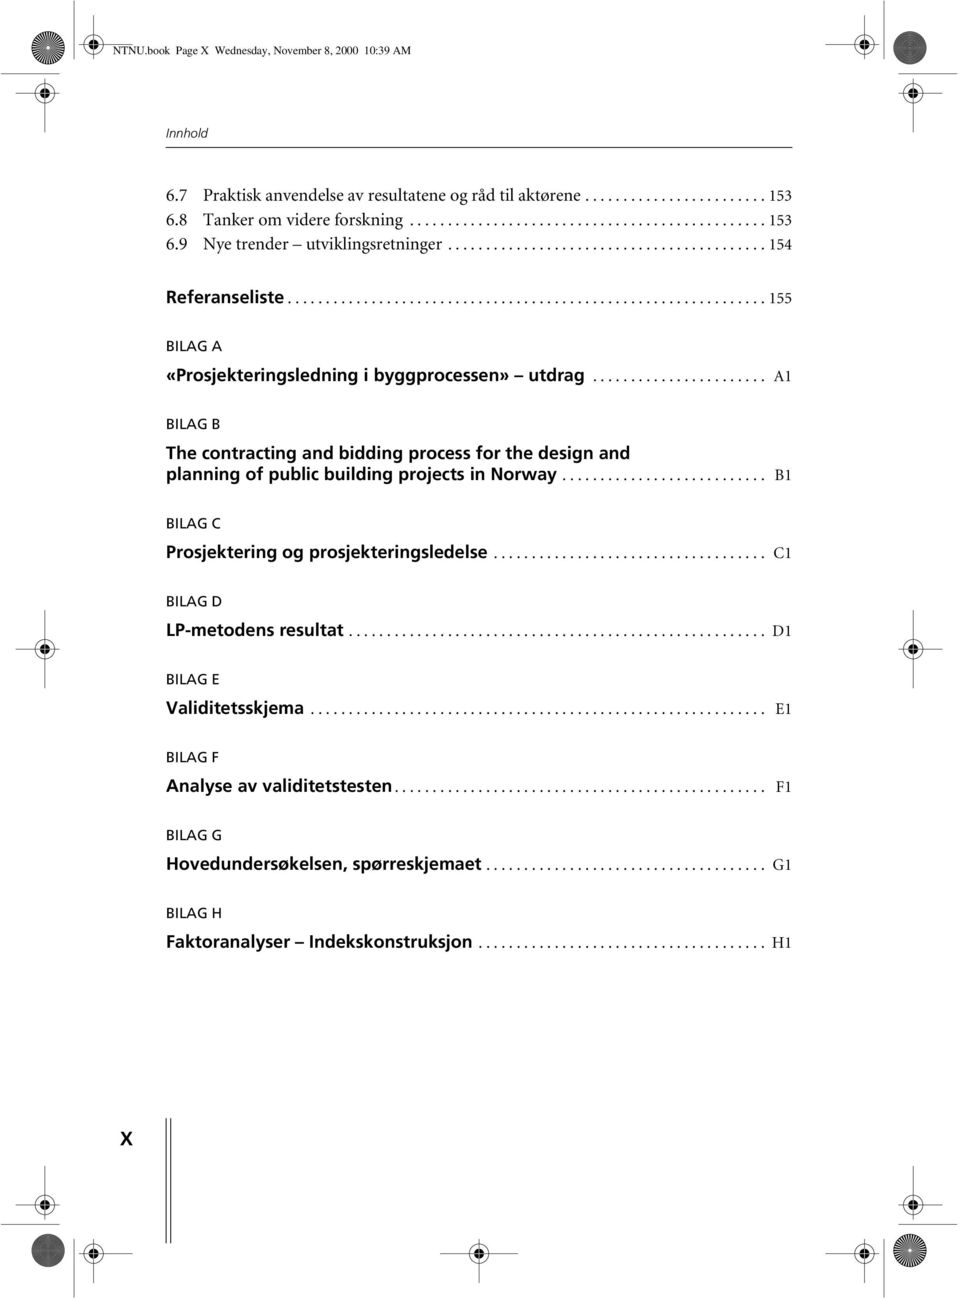 ...................... A1 BILAG B The contracting and bidding process for the design and planning of public building projects in Norway........................... B1 BILAG C Prosjektering og prosjekteringsledelse.